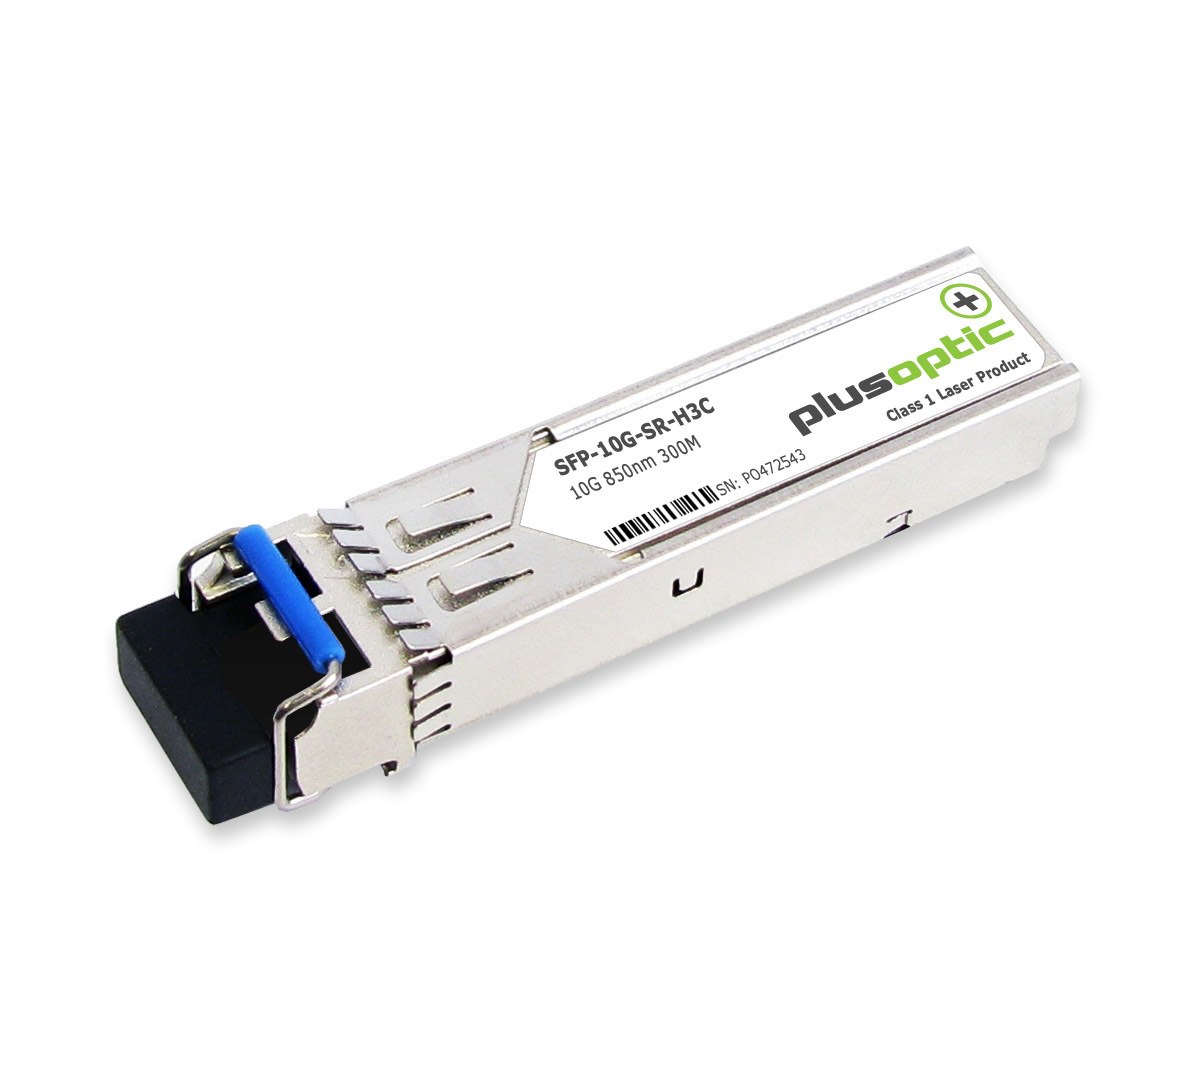 PlusOptic HP / H3C Compatible (Jd092a JD092B Jl437a Sfp-Xg-Sx-Mm850-A) 10G, SFP+, 850NM, 300M Transceiver, LC Connector For MMF With Dom | PlusOptic SFP-10G-SR-H3C